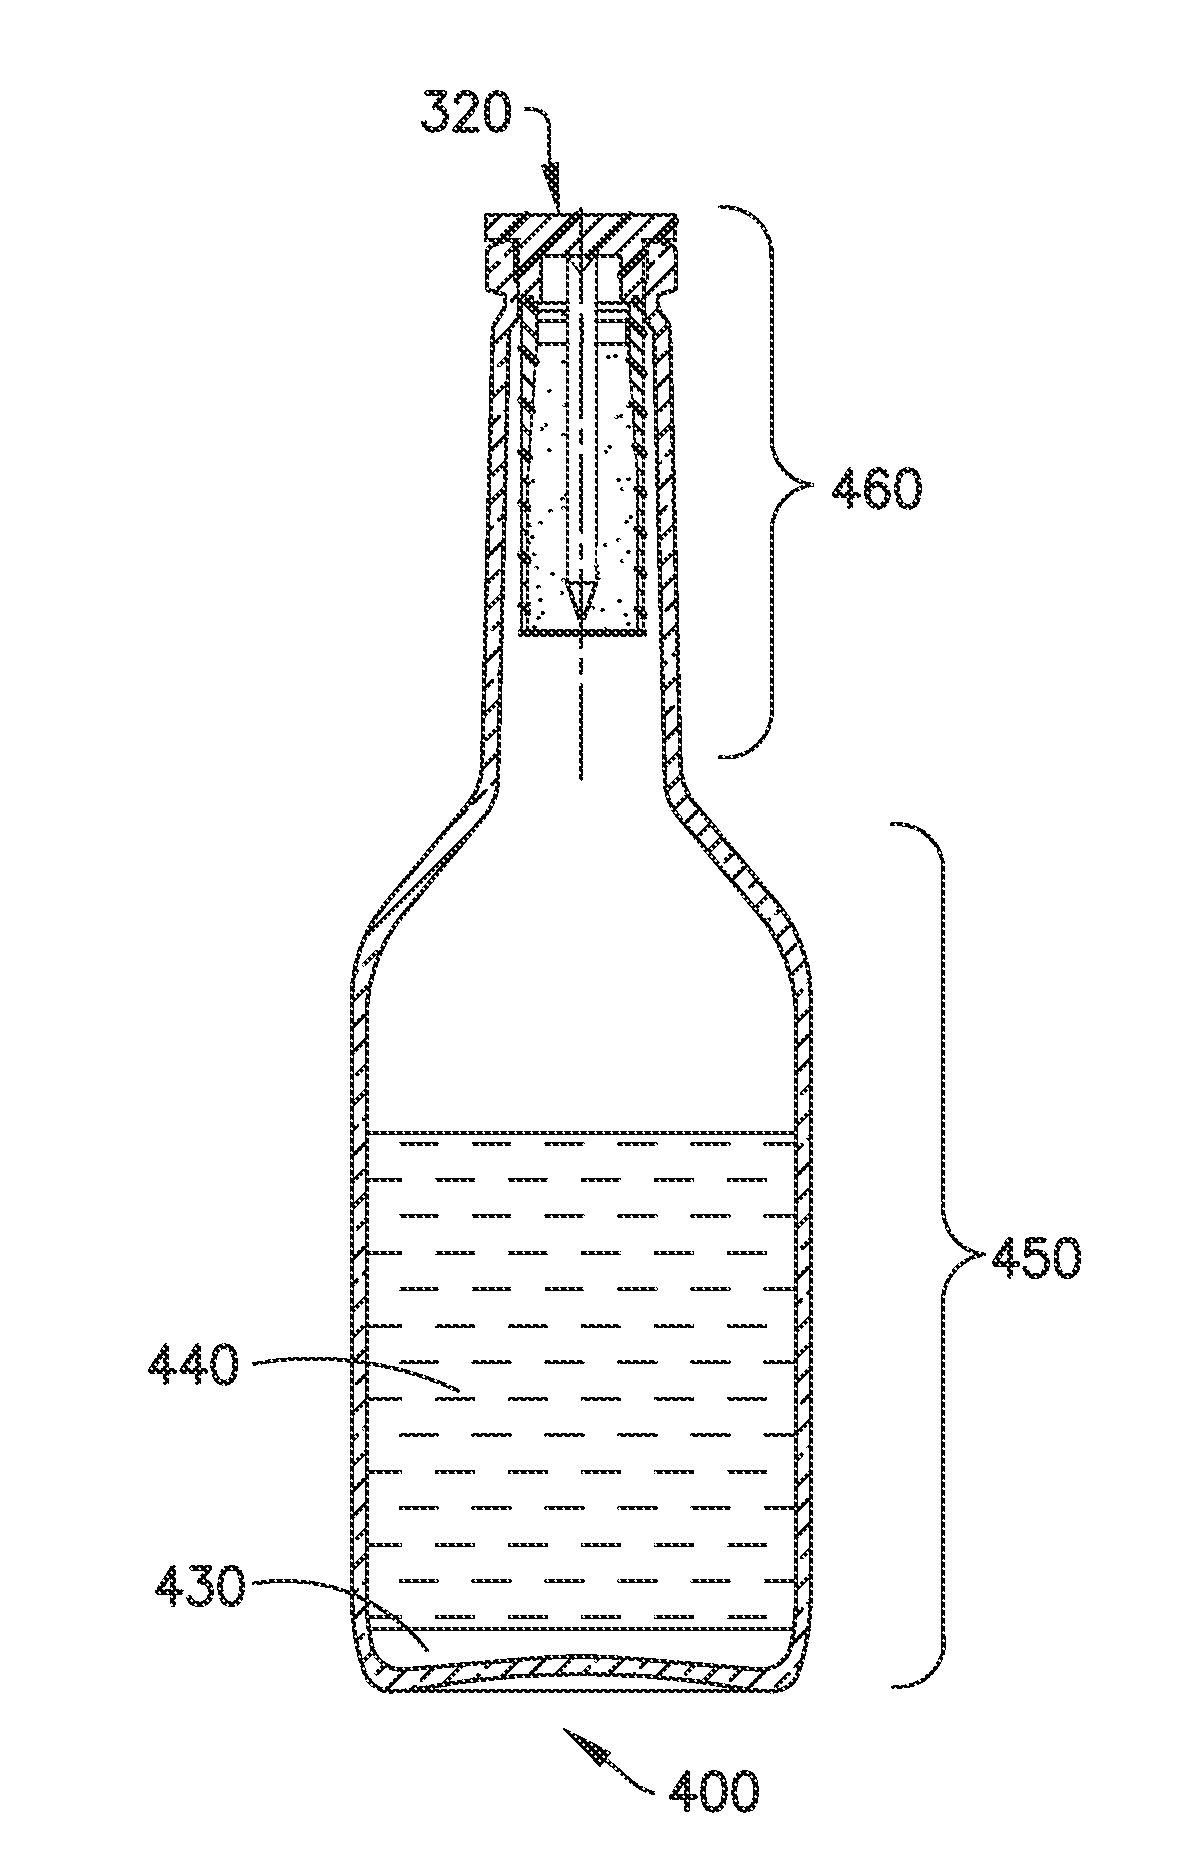 Blood culture bottles with mechanisms for controlled release of substances into culture media